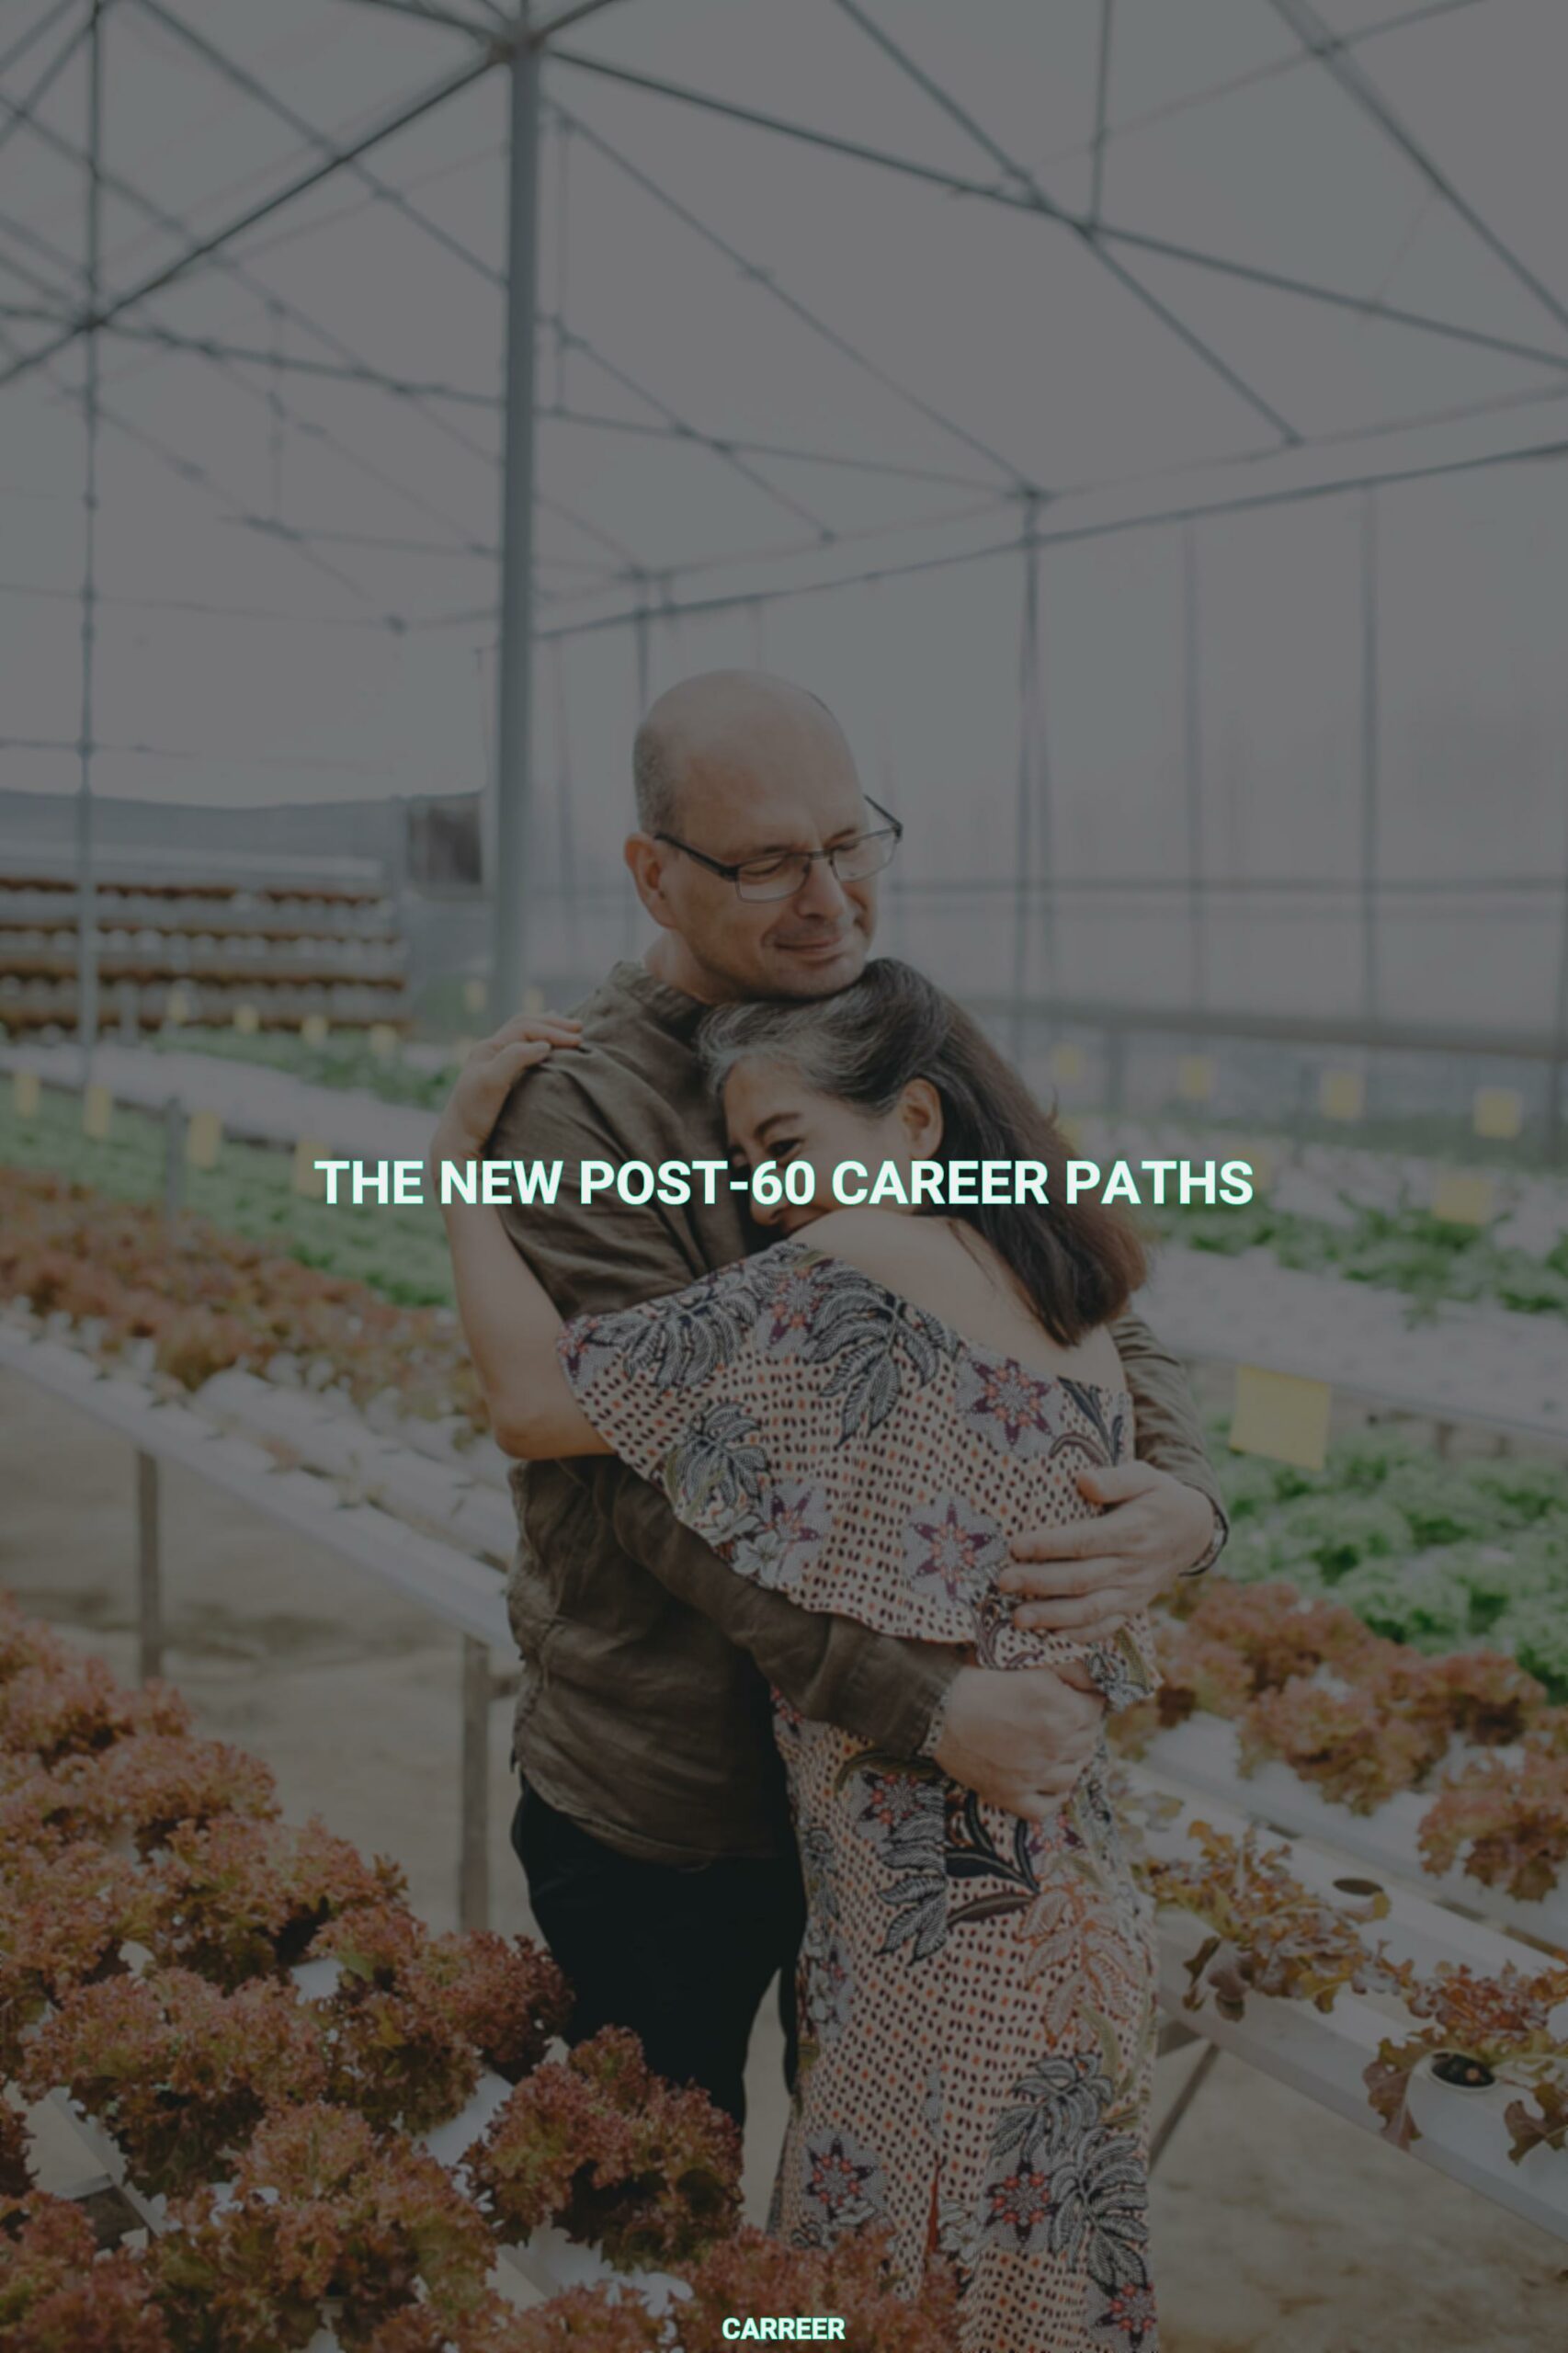 The new post-60 career paths